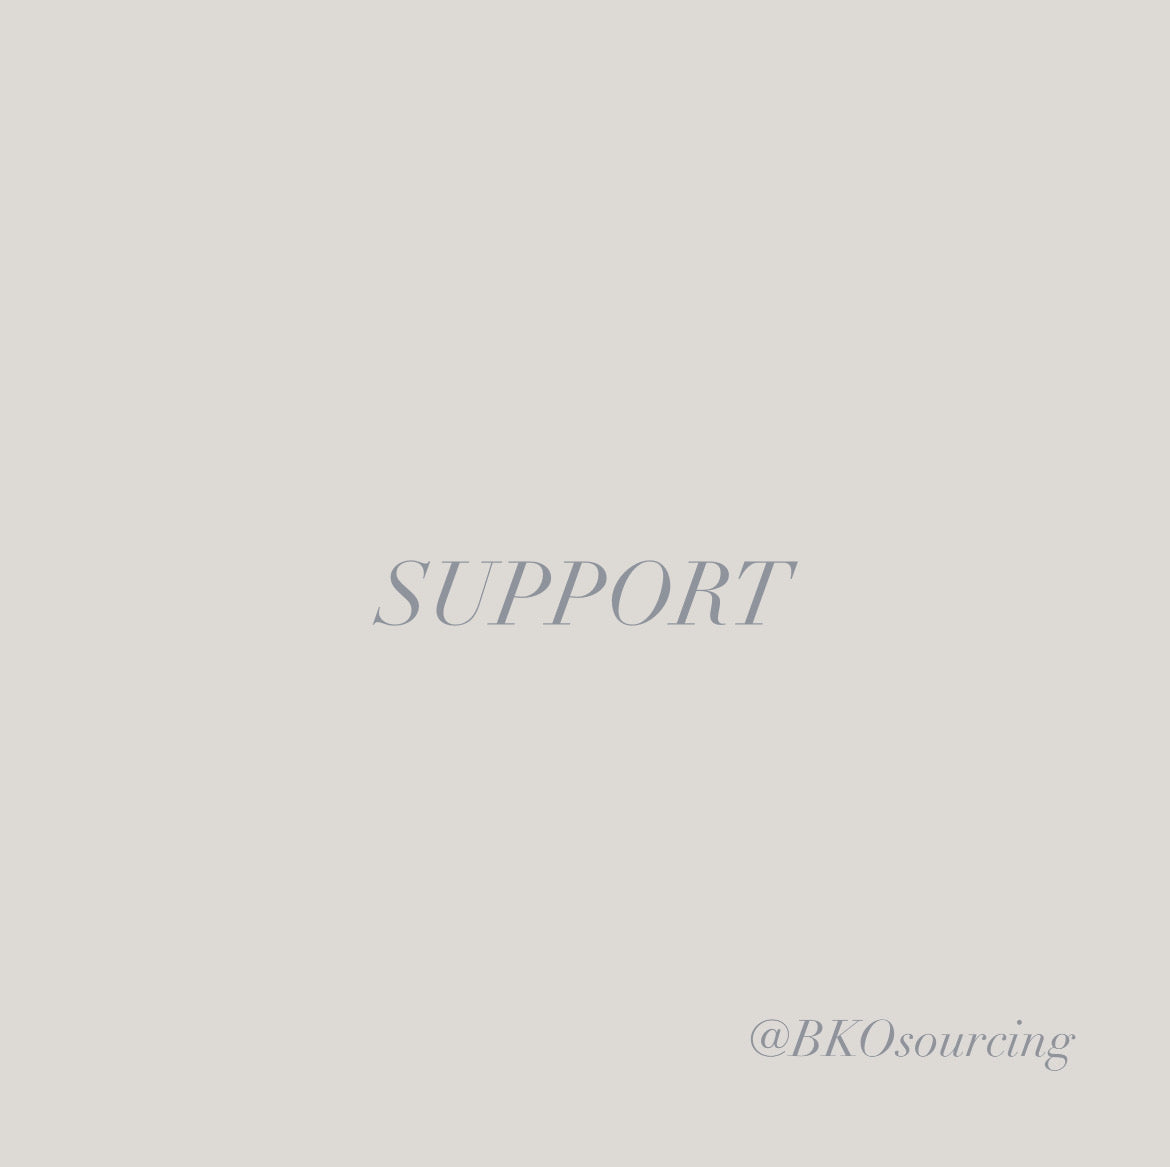 Support - Property Sourcing